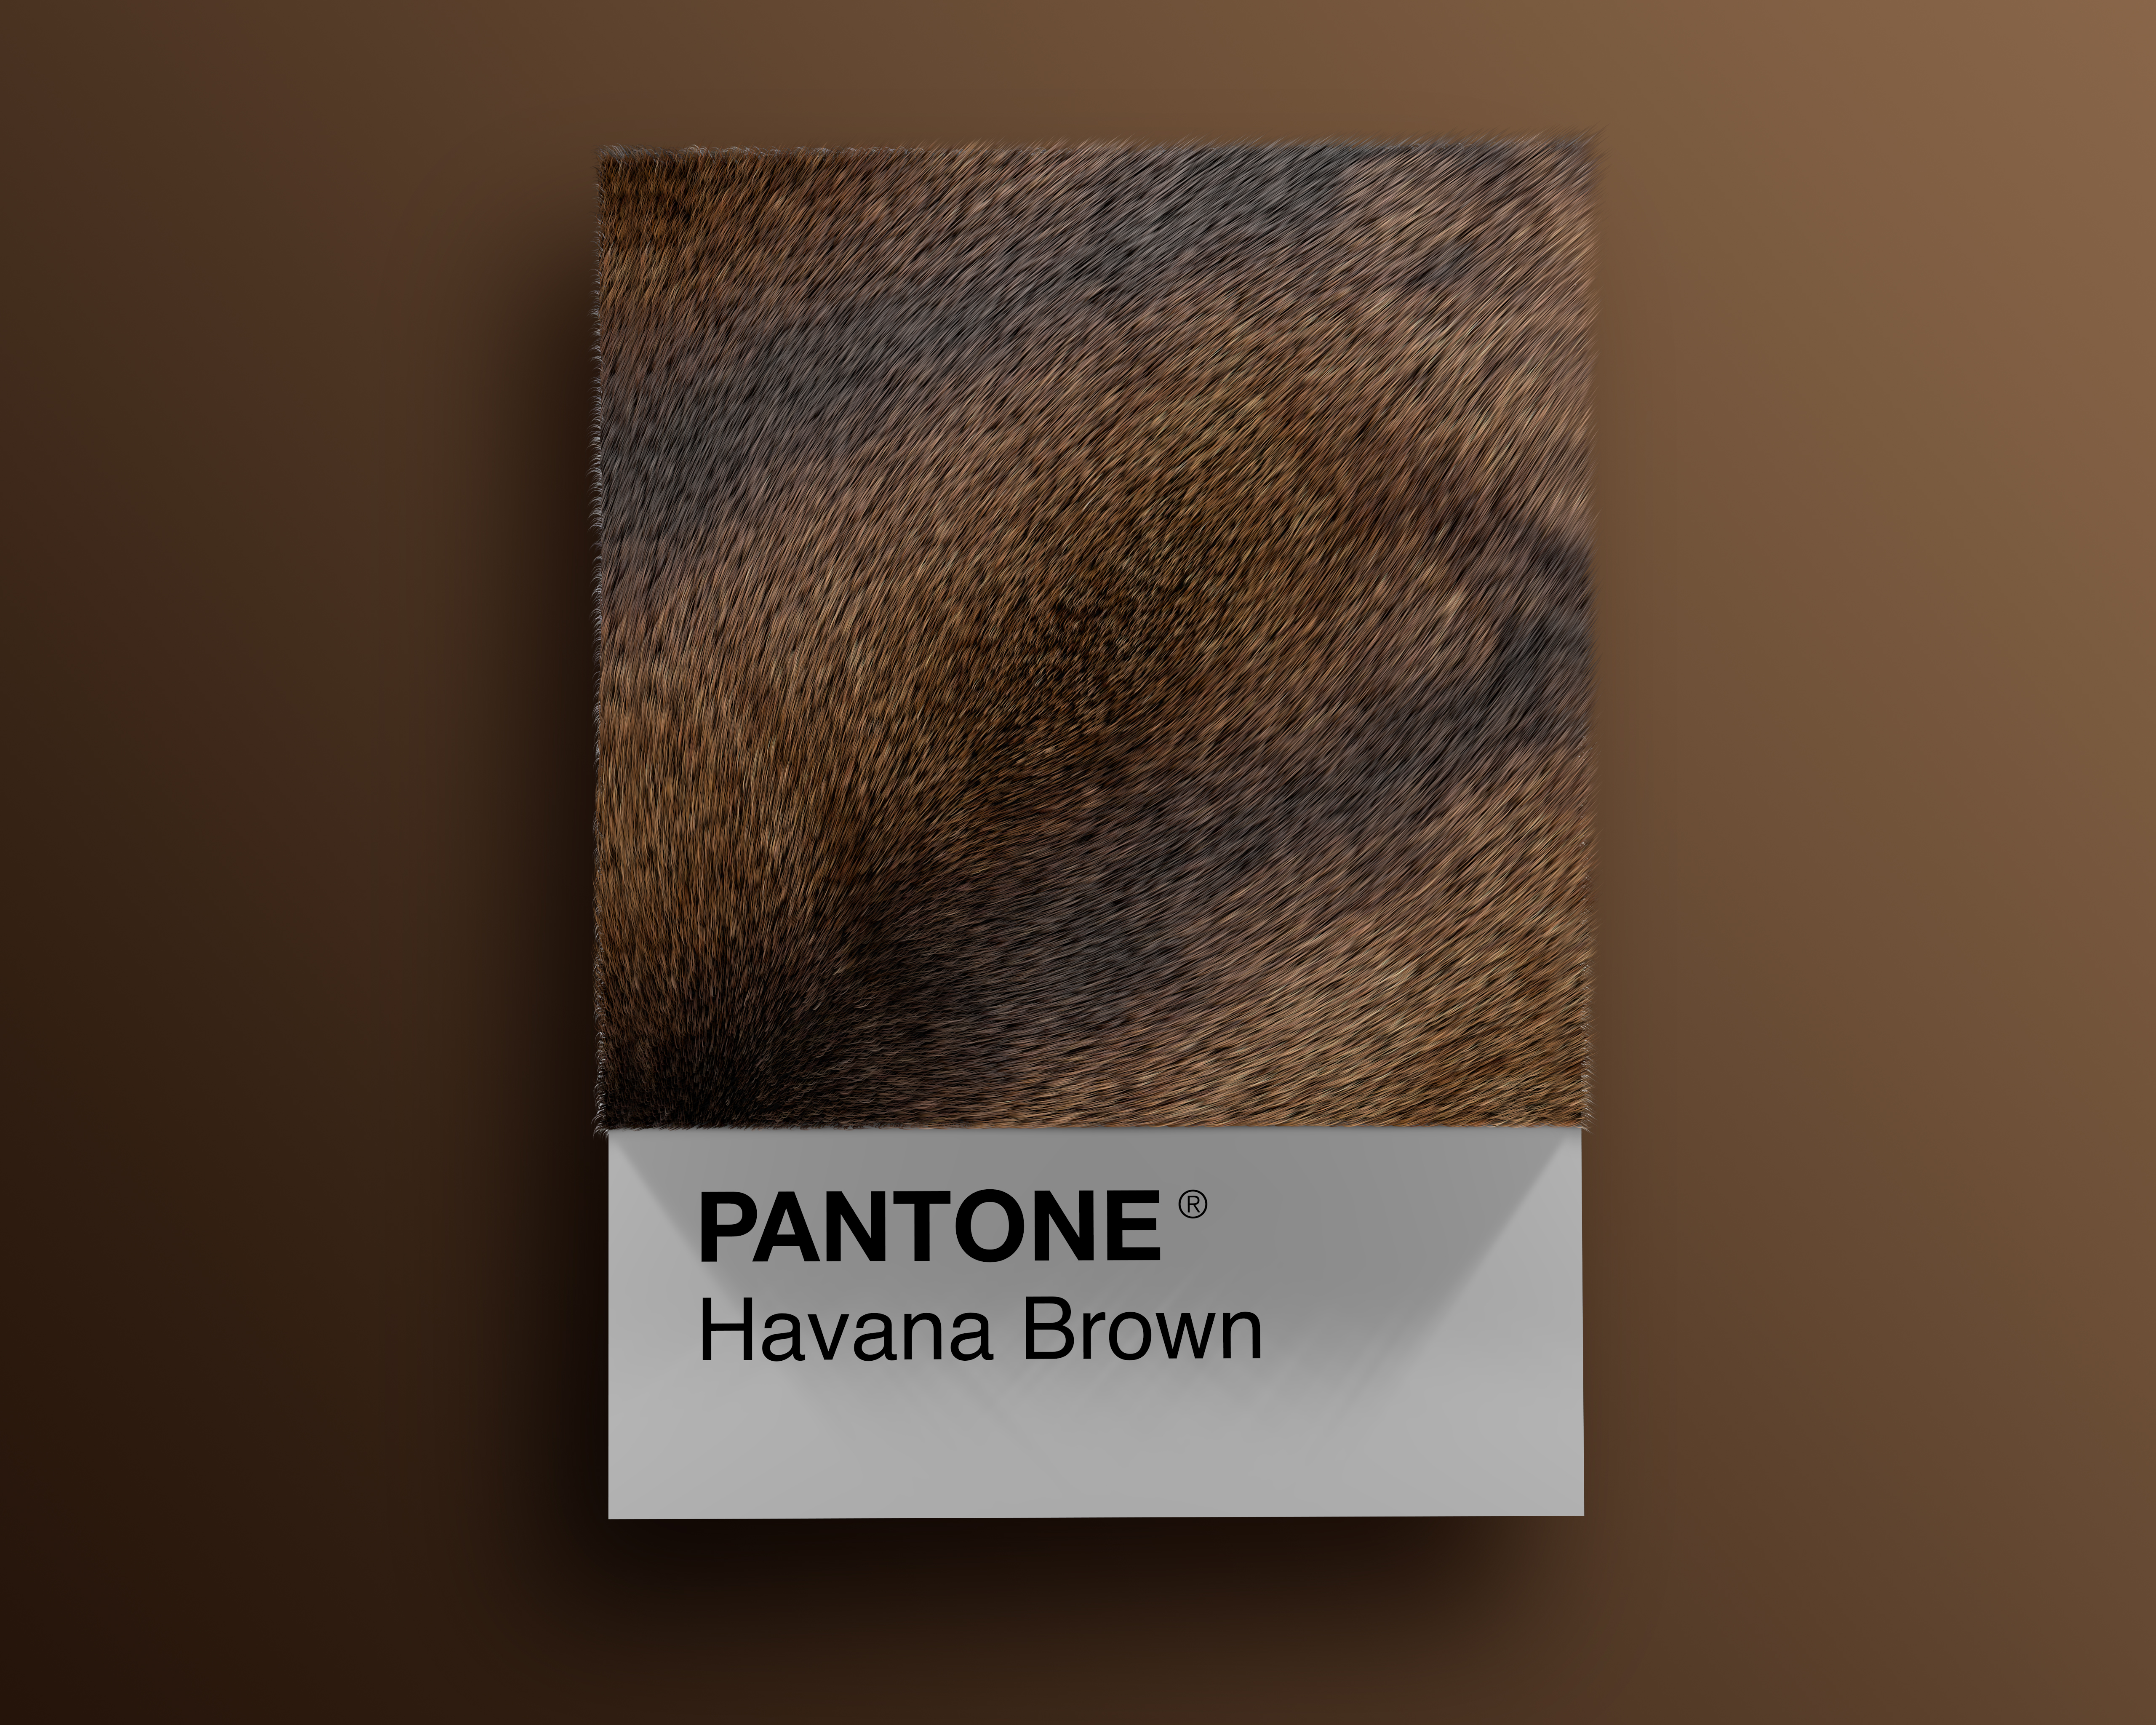 Alessio D'Amico - Cat breeds as Pantone | Collater.al 8